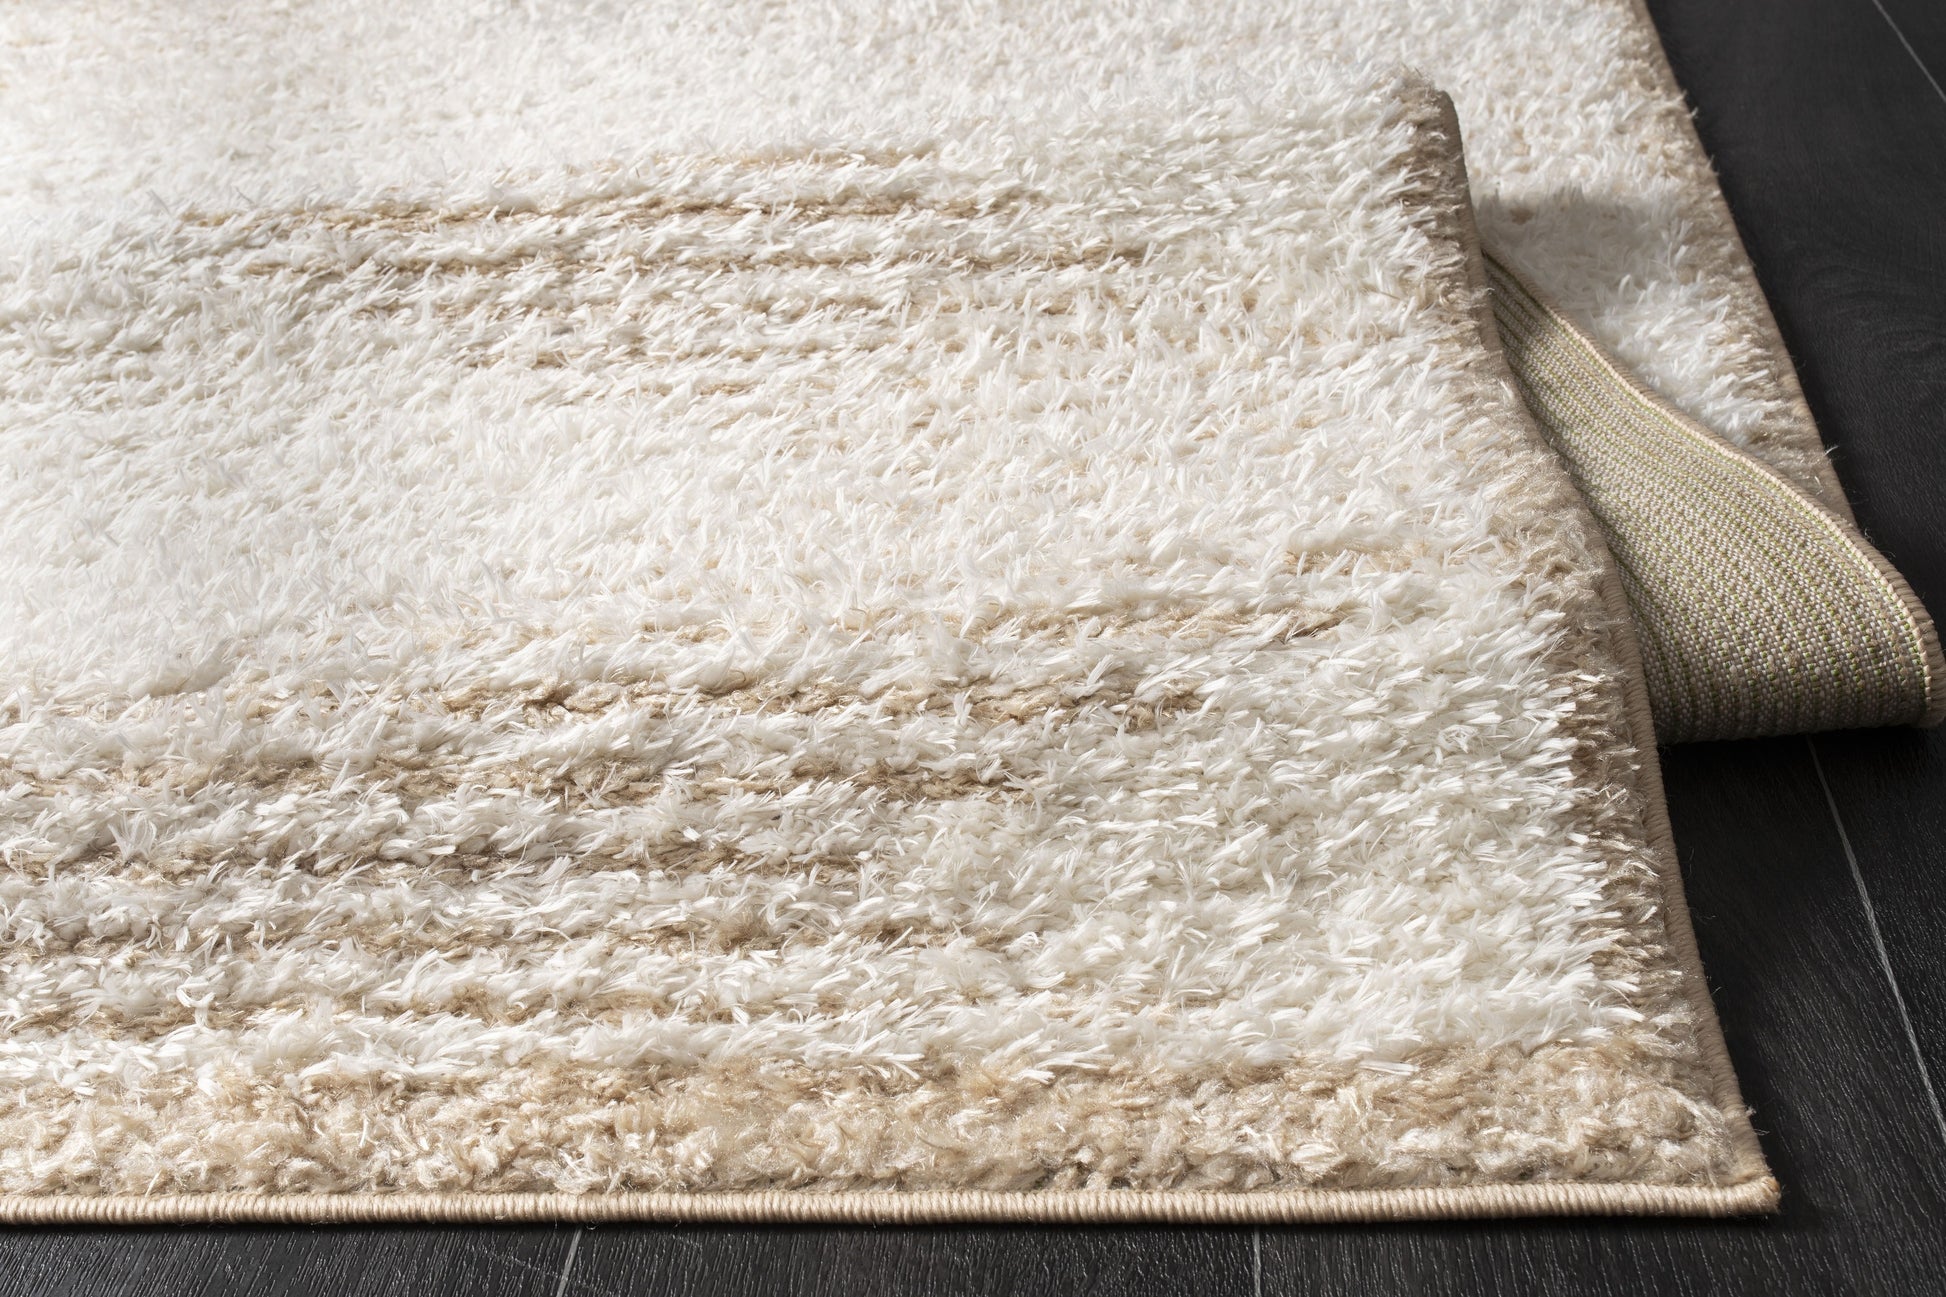 cream beige abstract fluffy thick shaggy area rug for living room bedroom 2x8, 3x10, 2x10 ft Long Runner Rug, Hallway, Balcony, Entry Way, Kitchen, Stairs